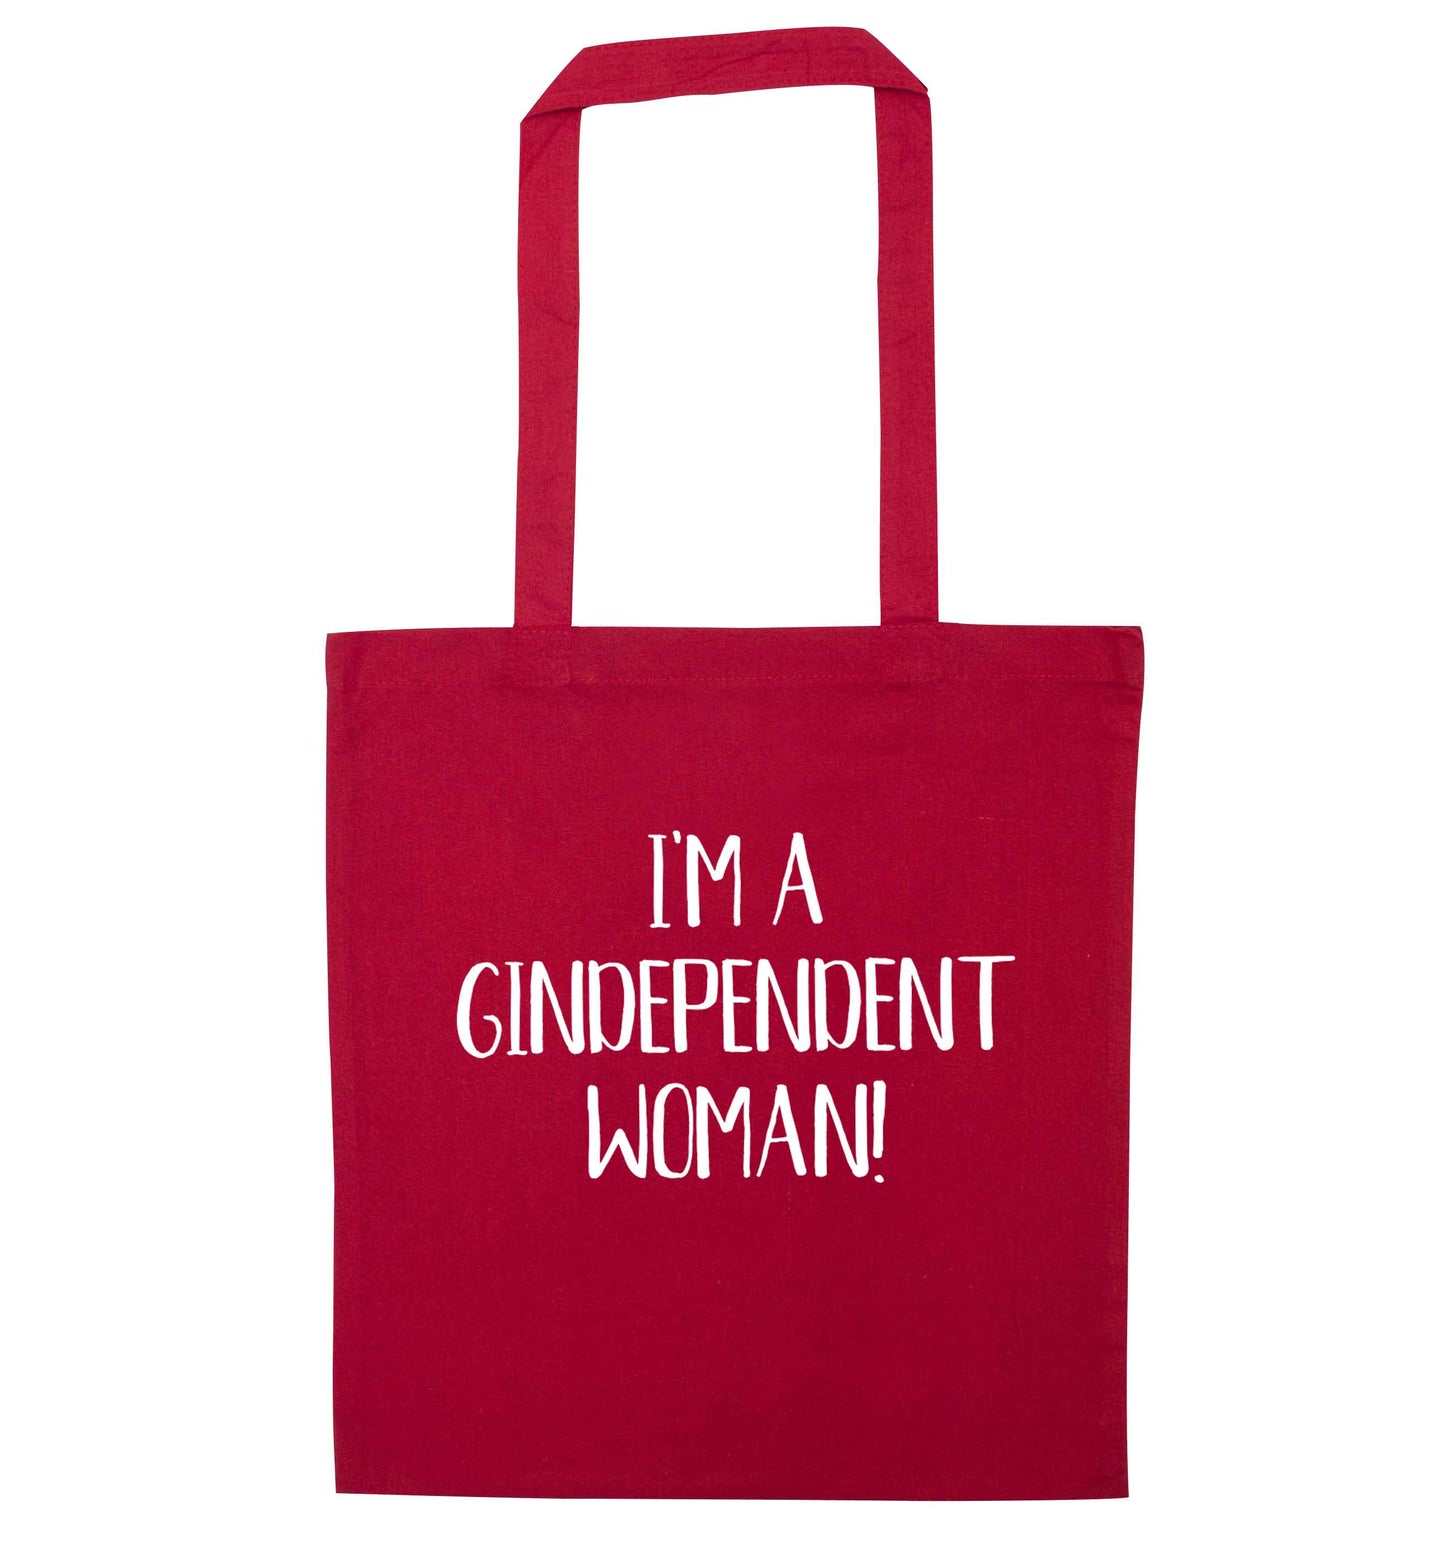 I'm a gindependent woman red tote bag